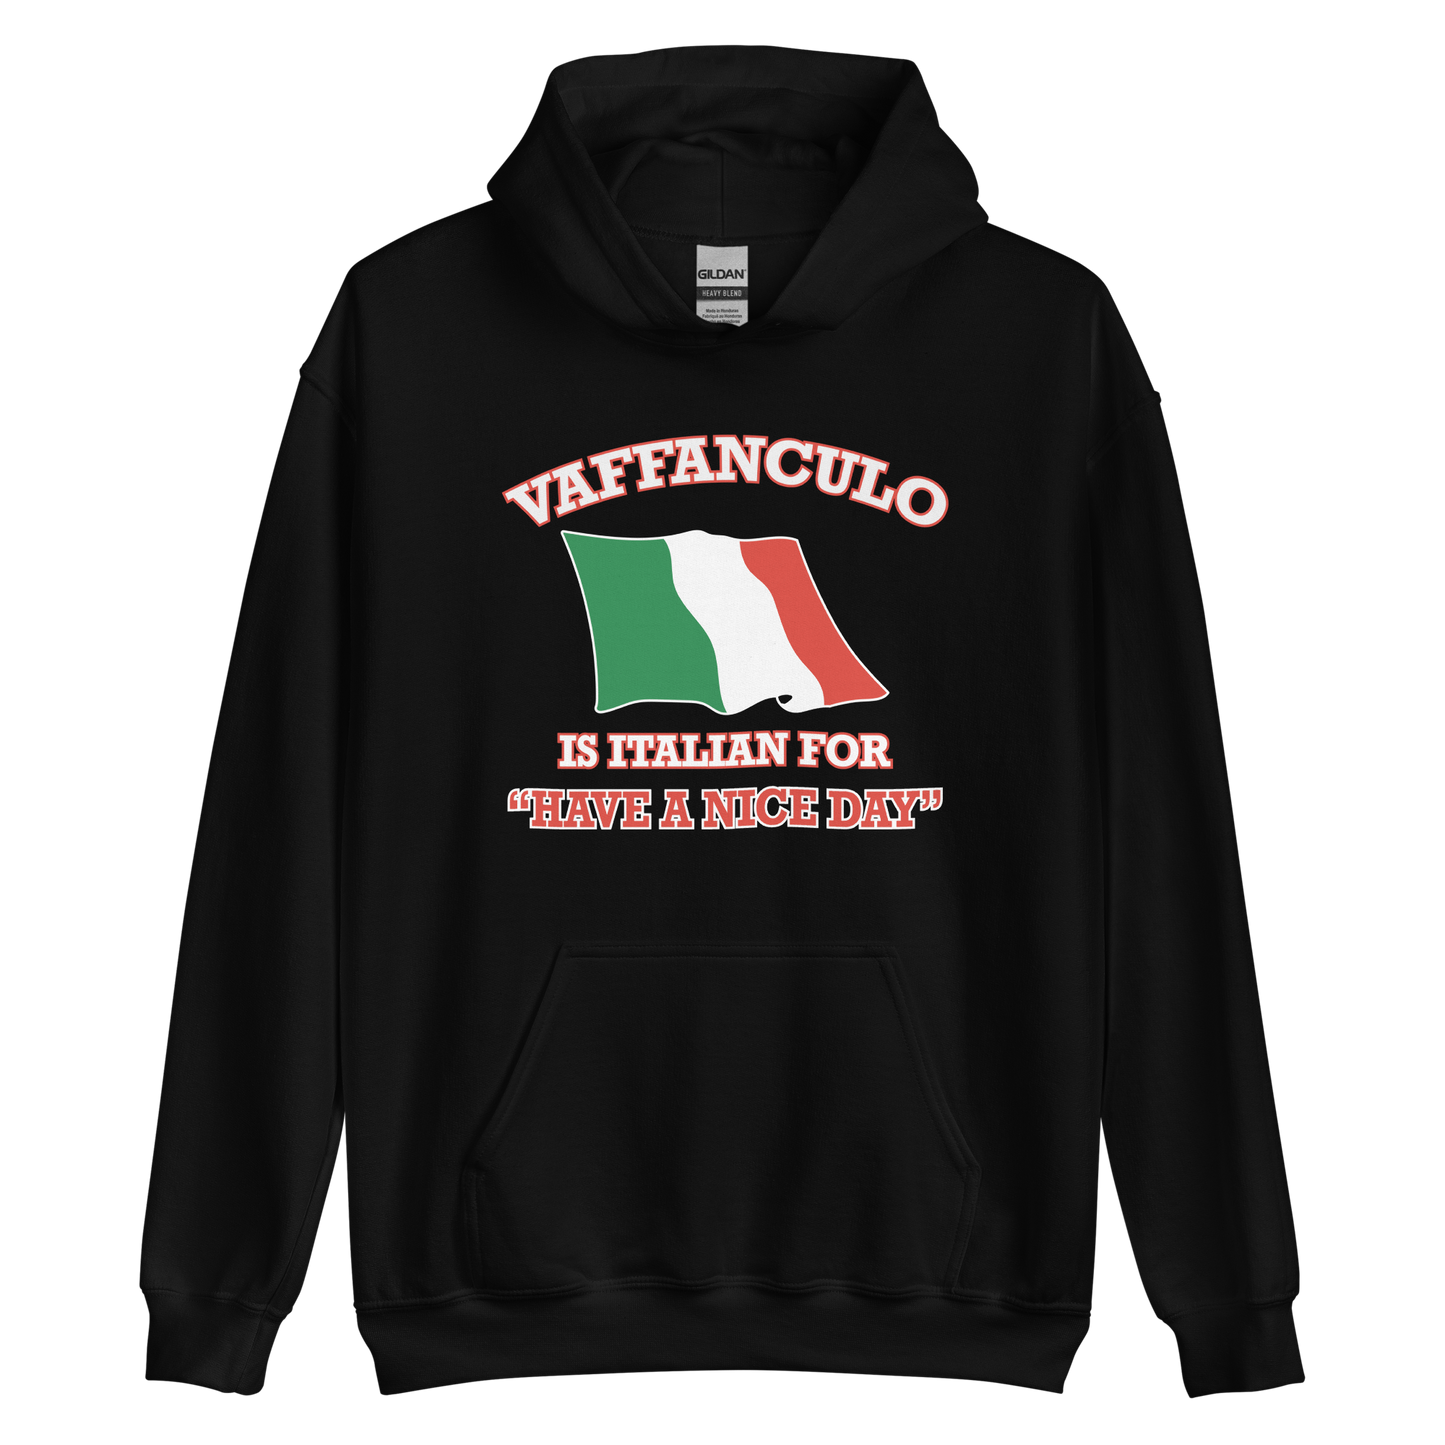 Vaffanculo Is Italian For 'Have a Nice Day' Humor Hoodie- Vintage Hoodie for Italians